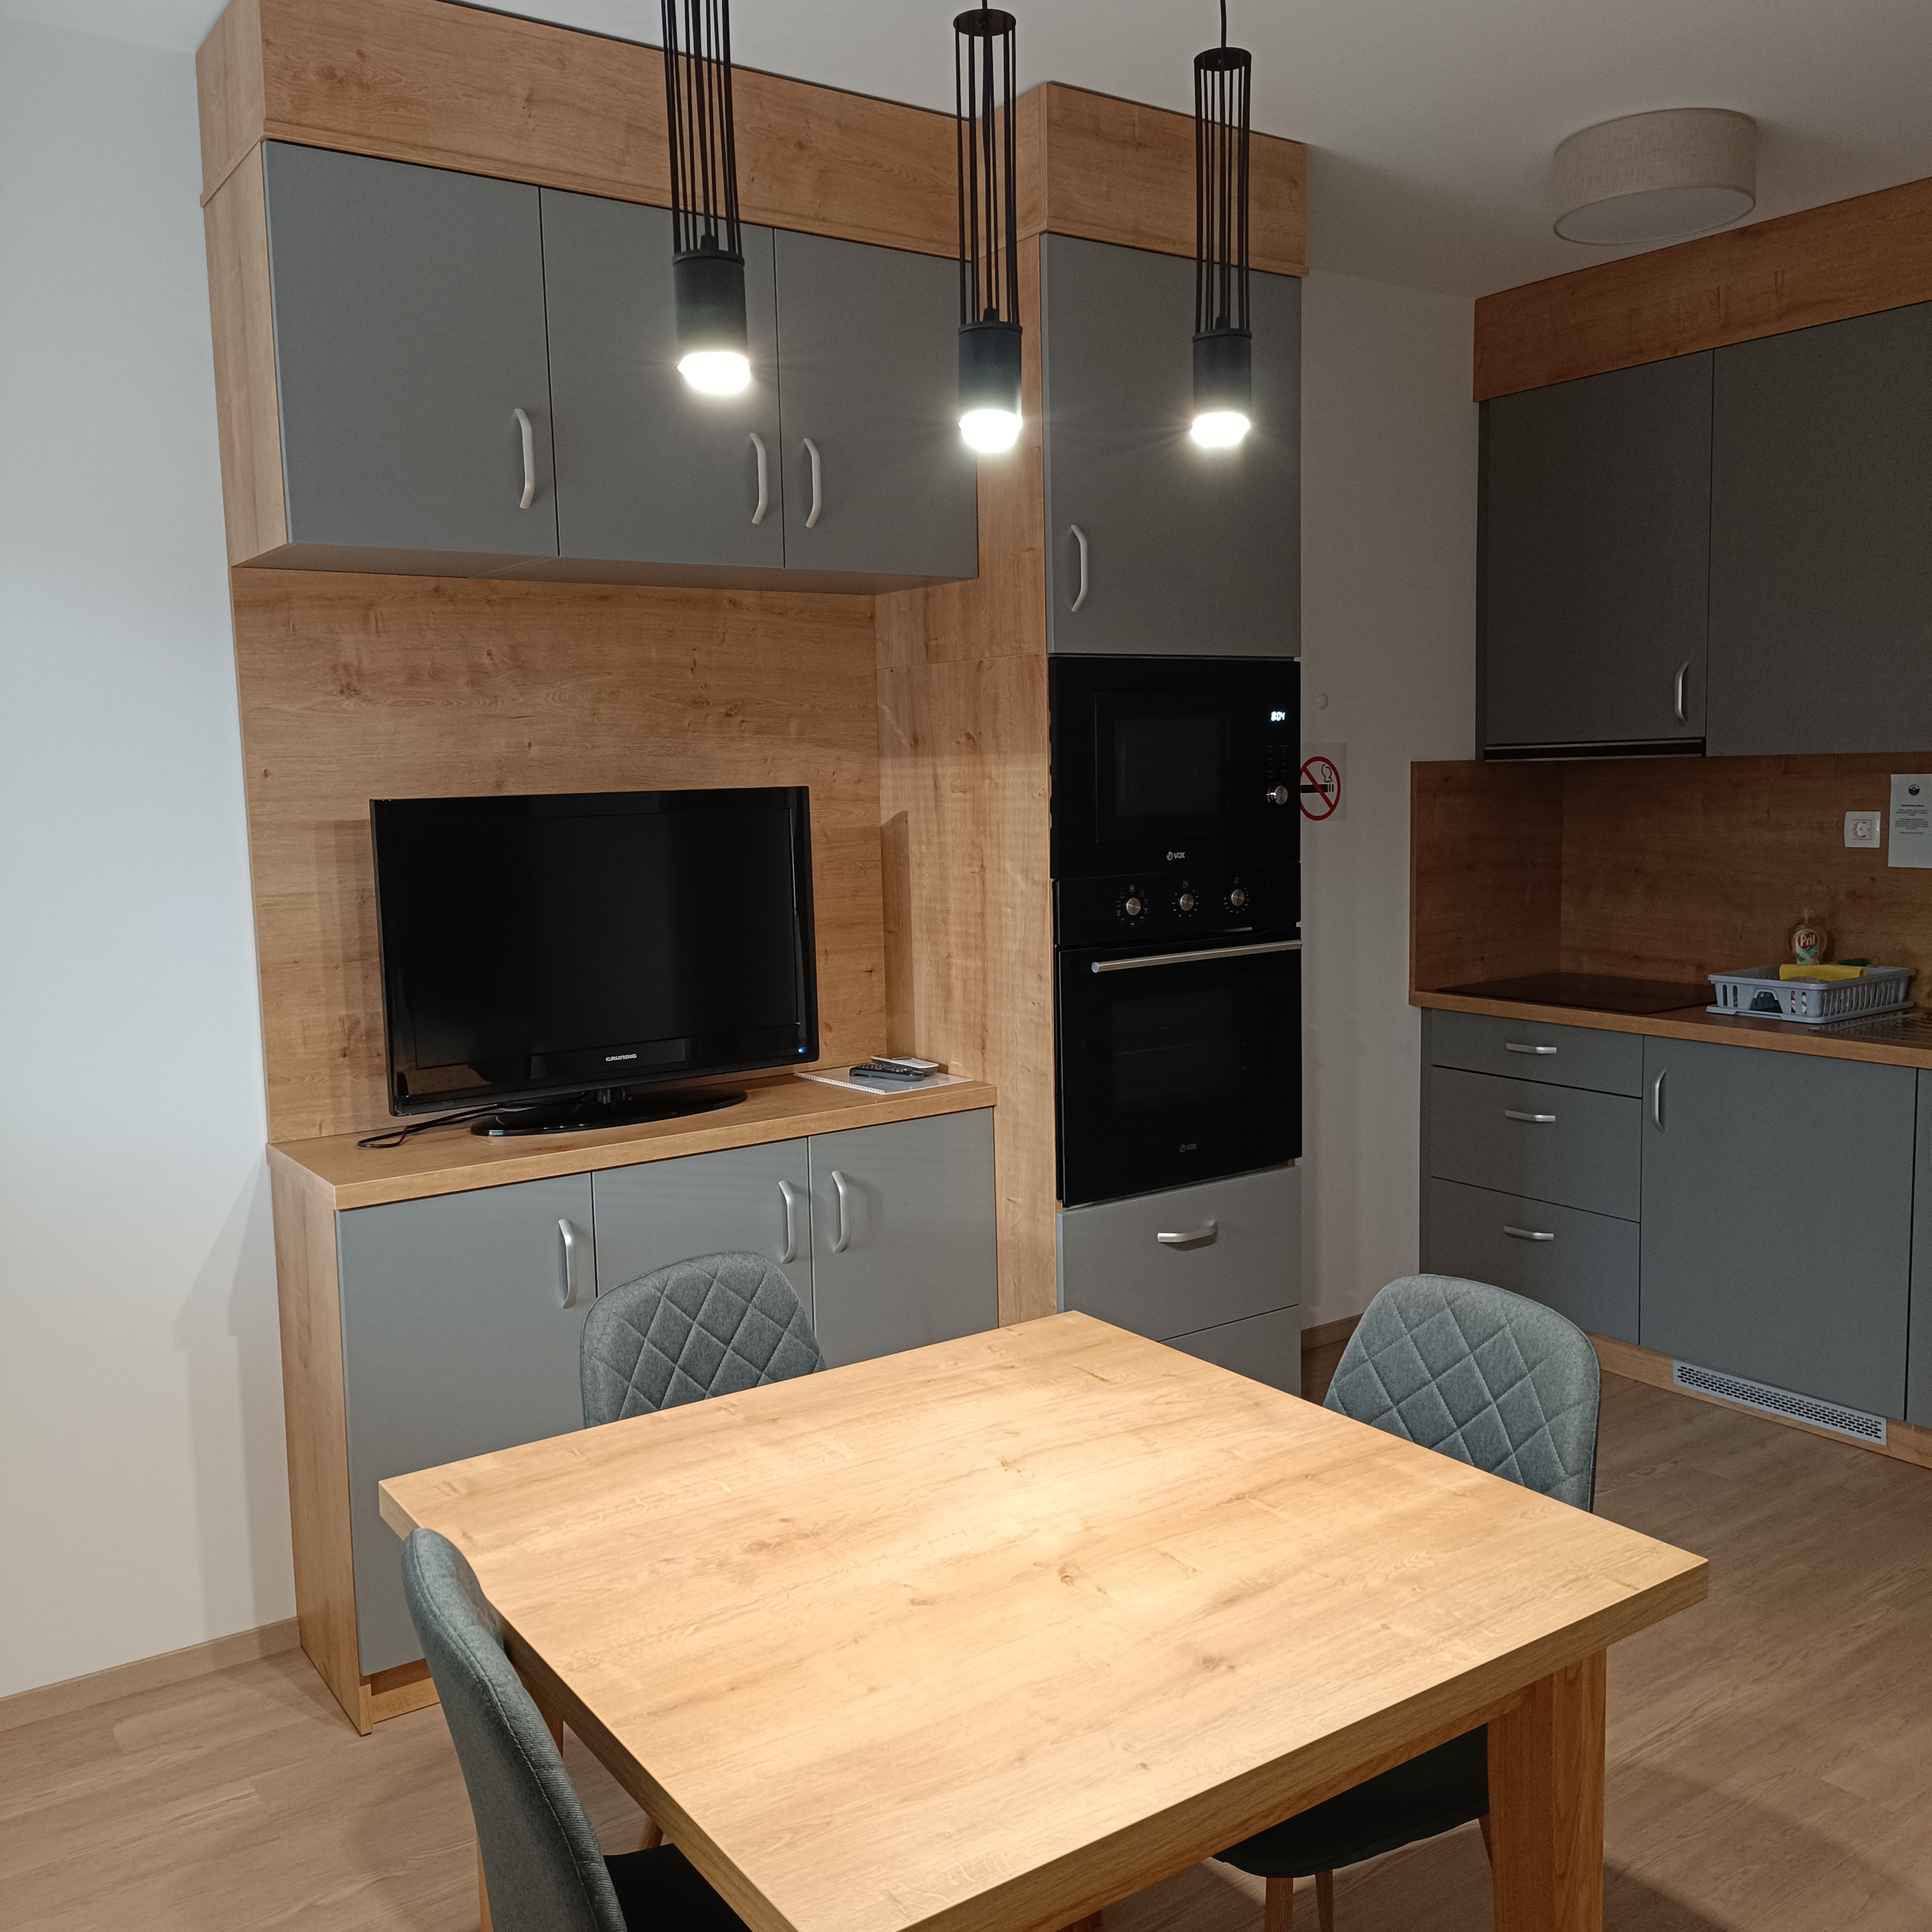 Room with kitchen 13